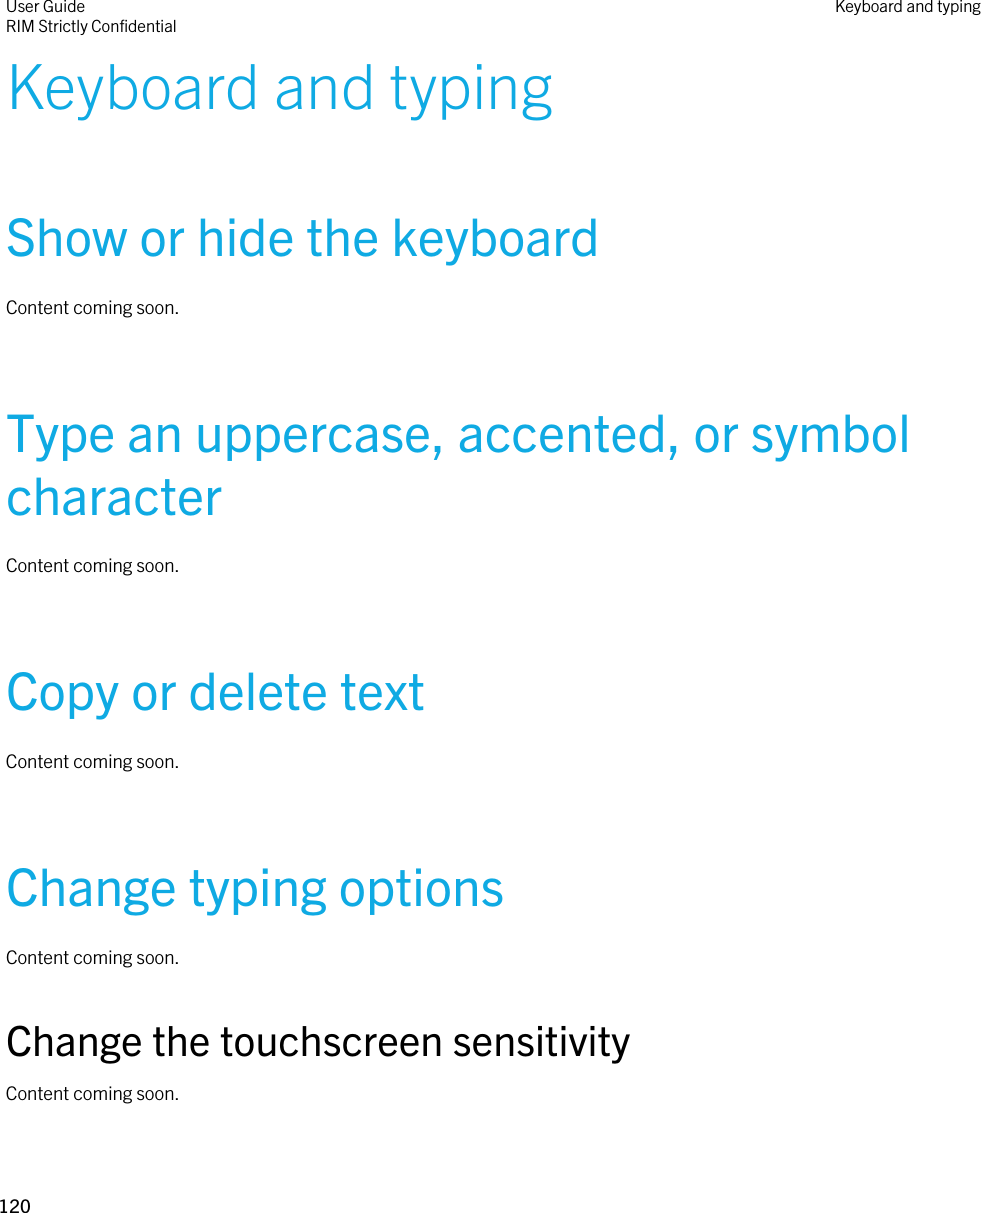 Keyboard and typingShow or hide the keyboardContent coming soon.Type an uppercase, accented, or symbol characterContent coming soon.Copy or delete textContent coming soon.Change typing optionsContent coming soon.Change the touchscreen sensitivityContent coming soon.User GuideRIM Strictly Confidential Keyboard and typing120 